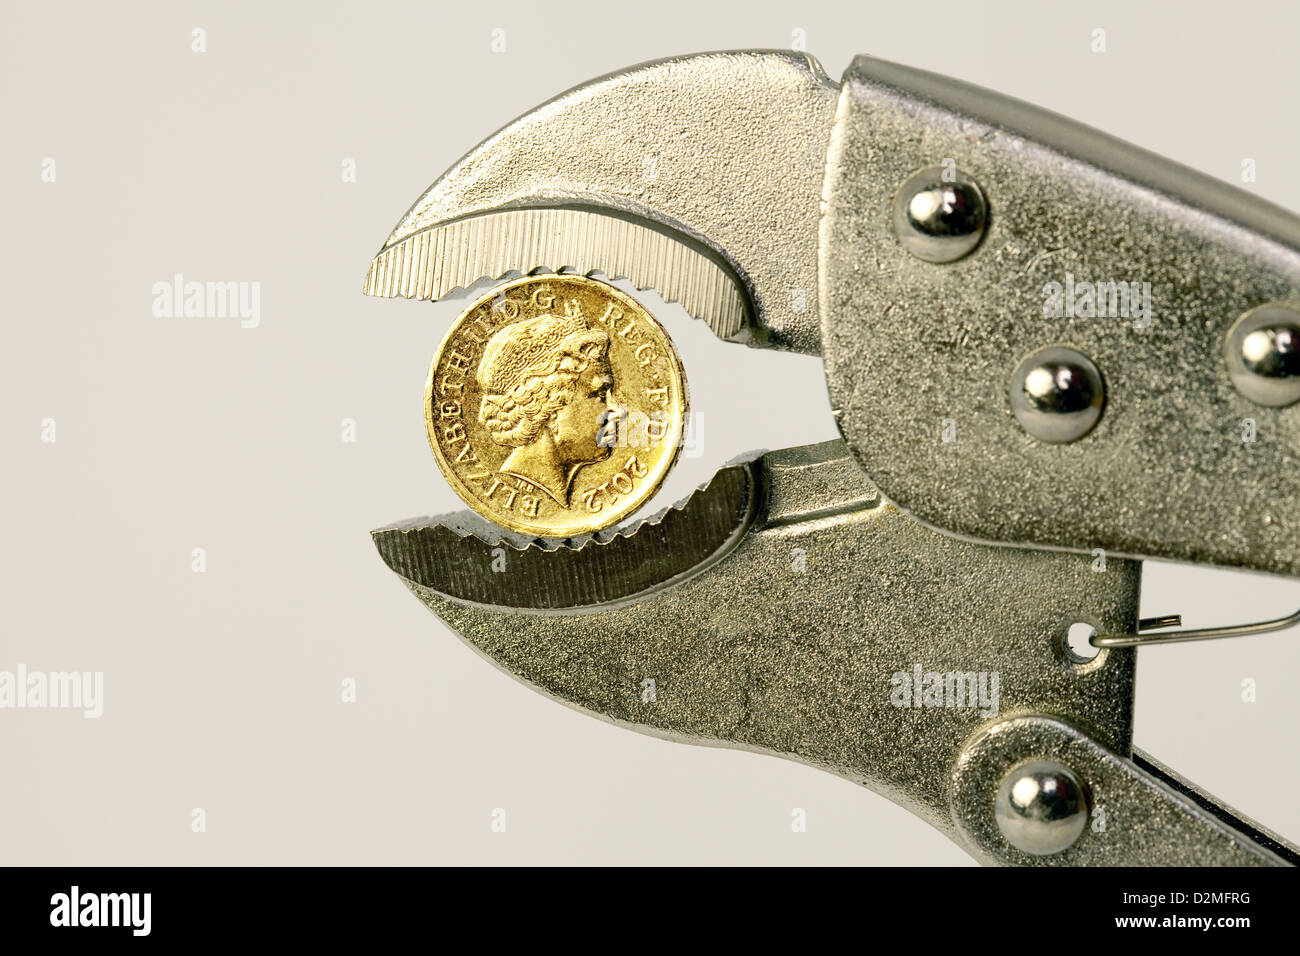 A british one pound coin in a wrench to illustrate the concept of the pound being under pressure, UK Stock Photo